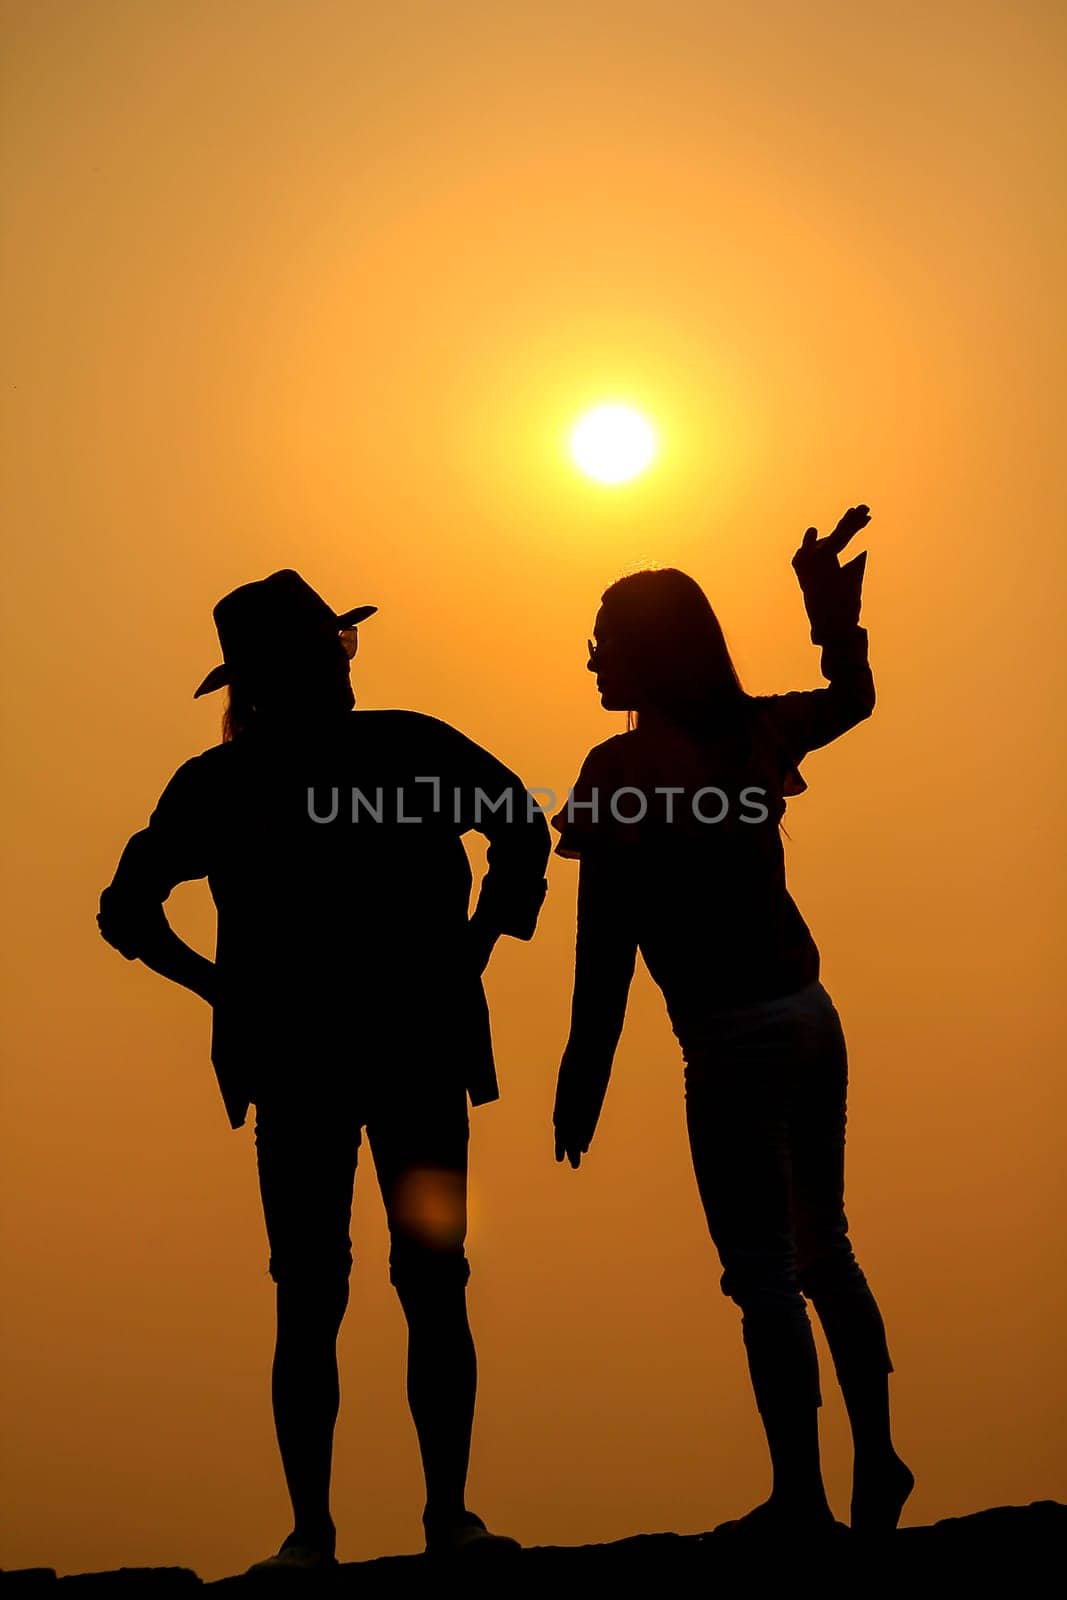 Women and men silhouettes on a rock at sunset.